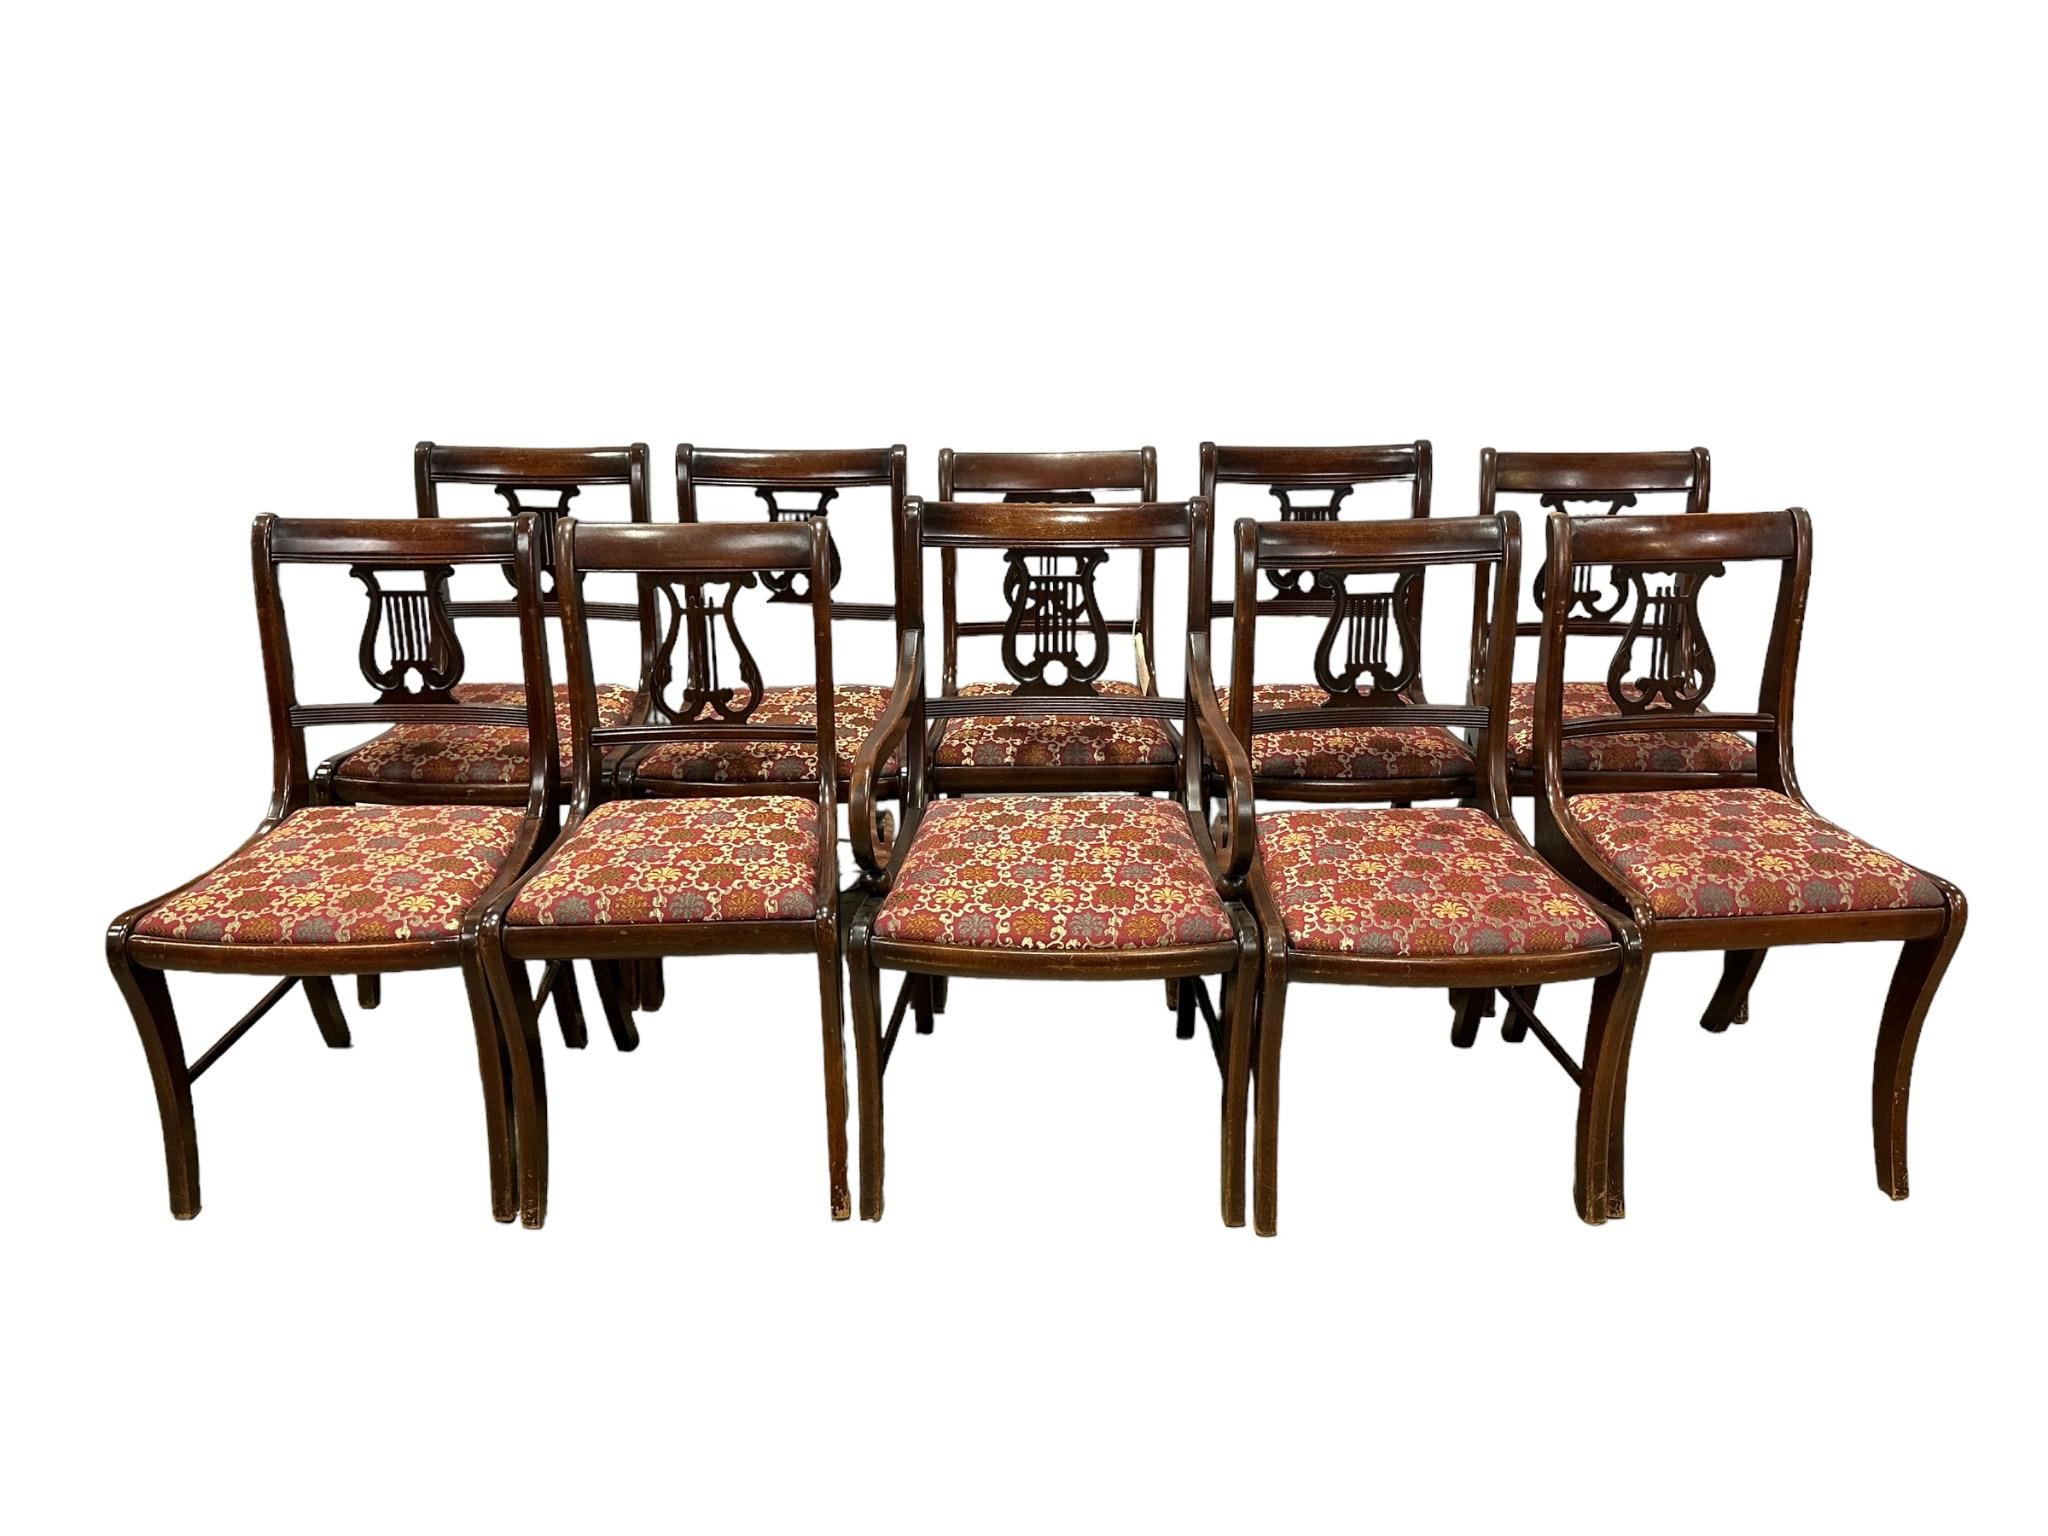 10 Antique Harp Back Dinning Chairs